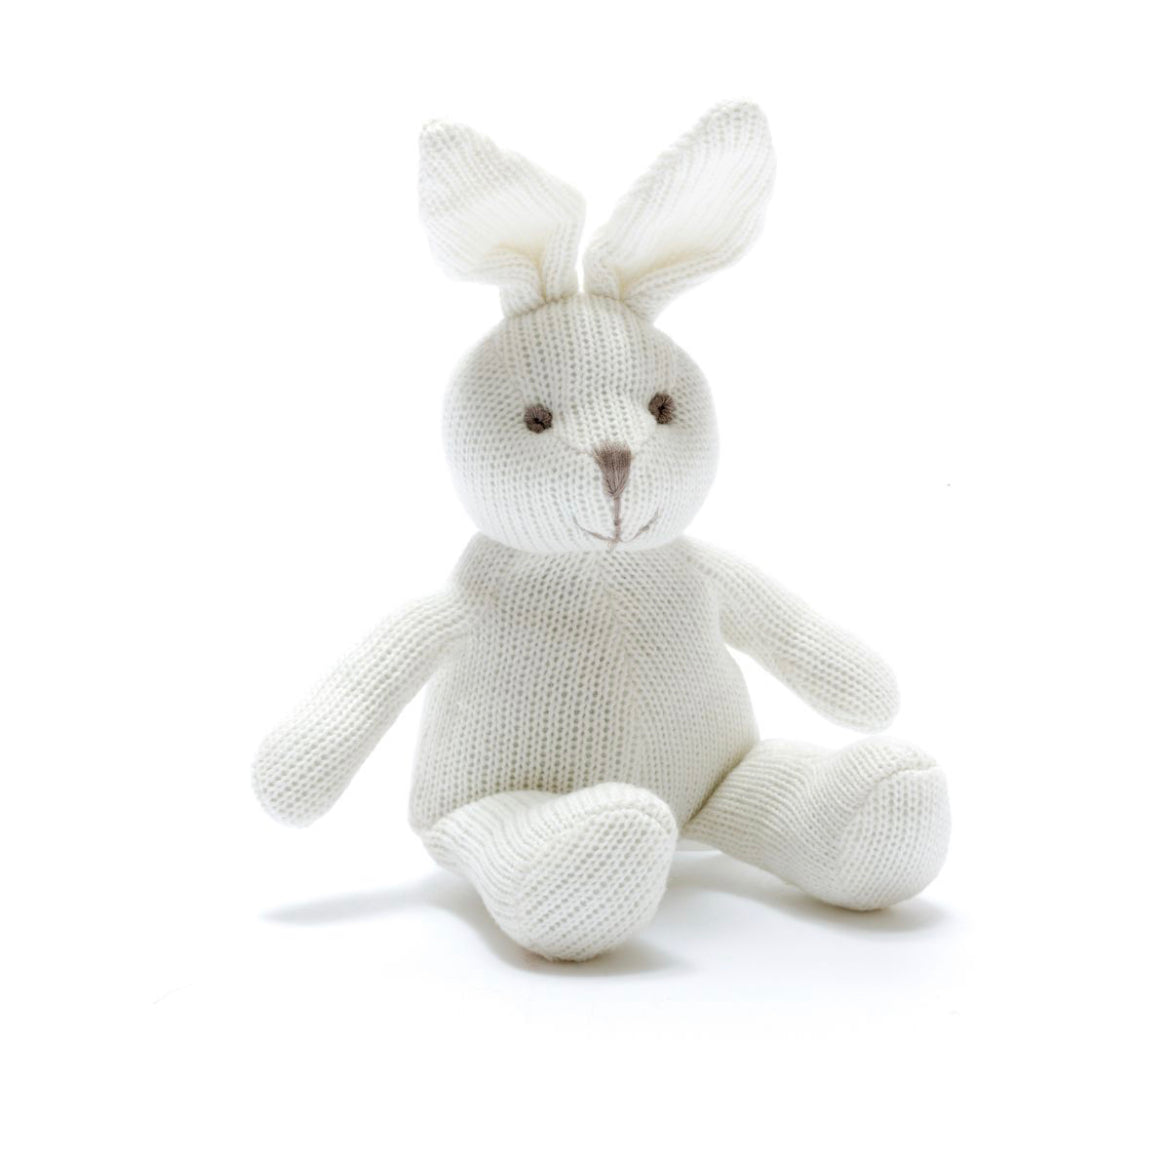 Best Years LTD Knitted Organic Cotton White Bunny Baby Rattle